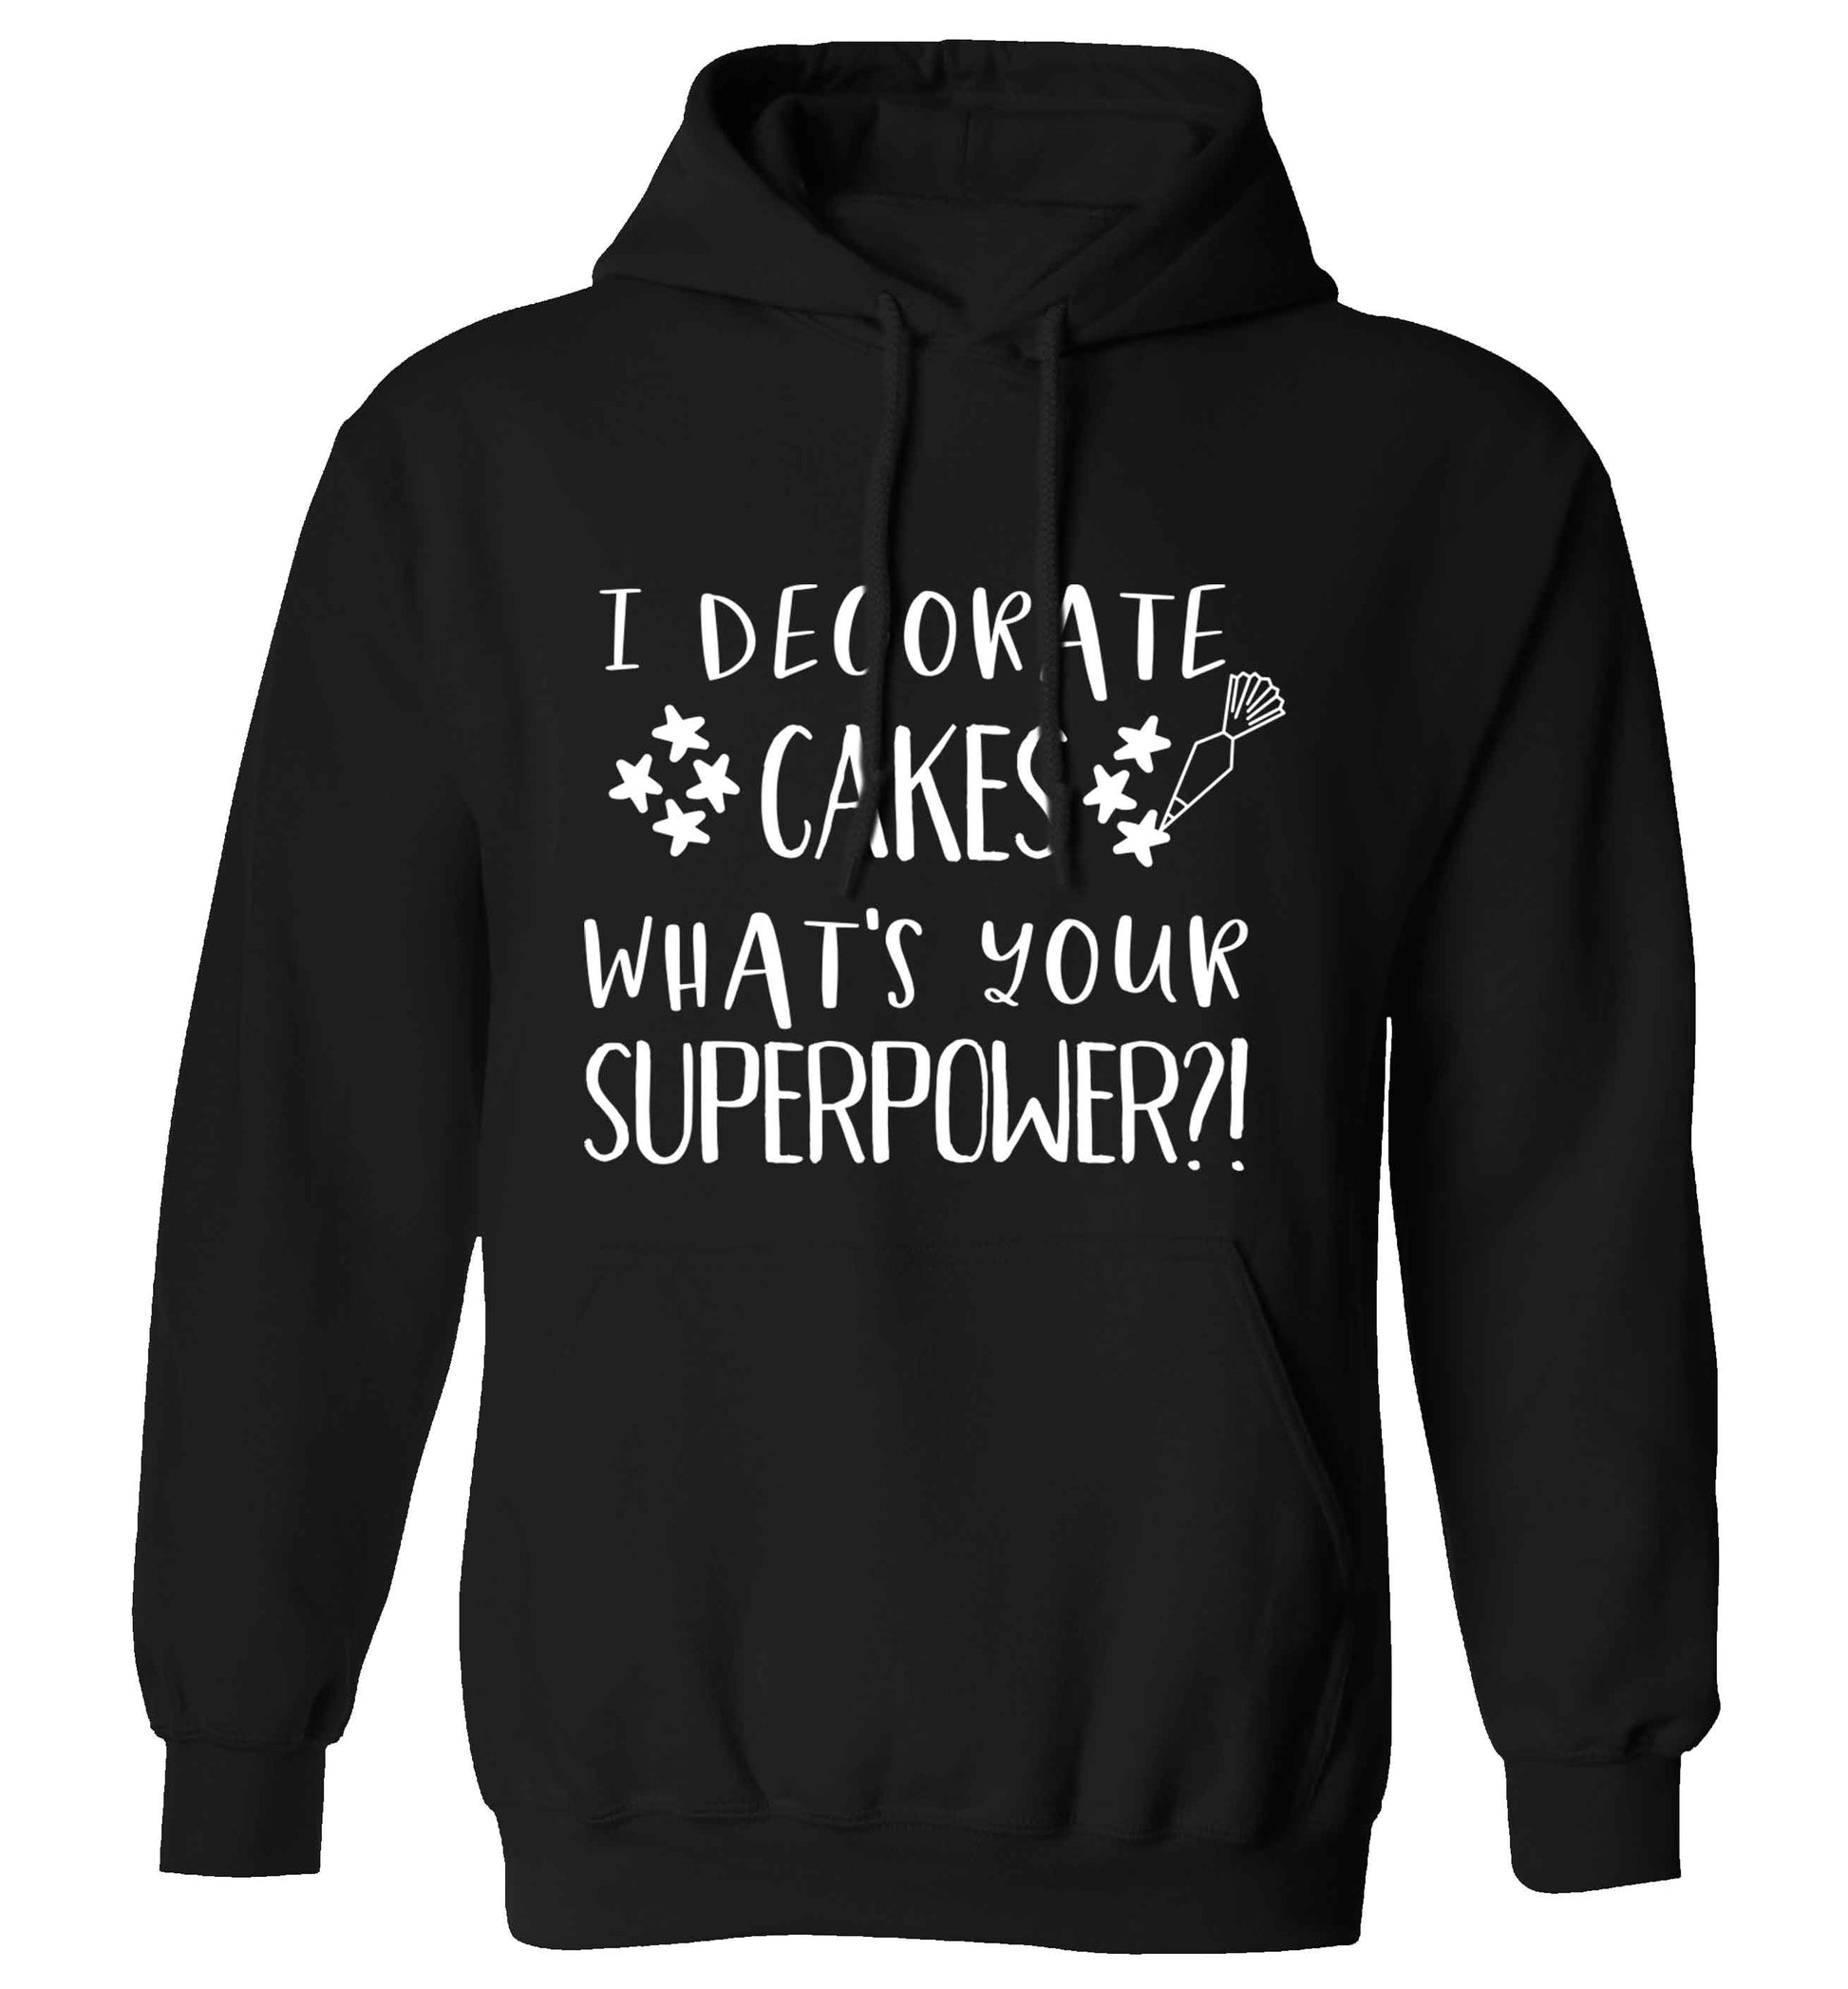 I decorate cakes what's your superpower?! adults unisex black hoodie 2XL